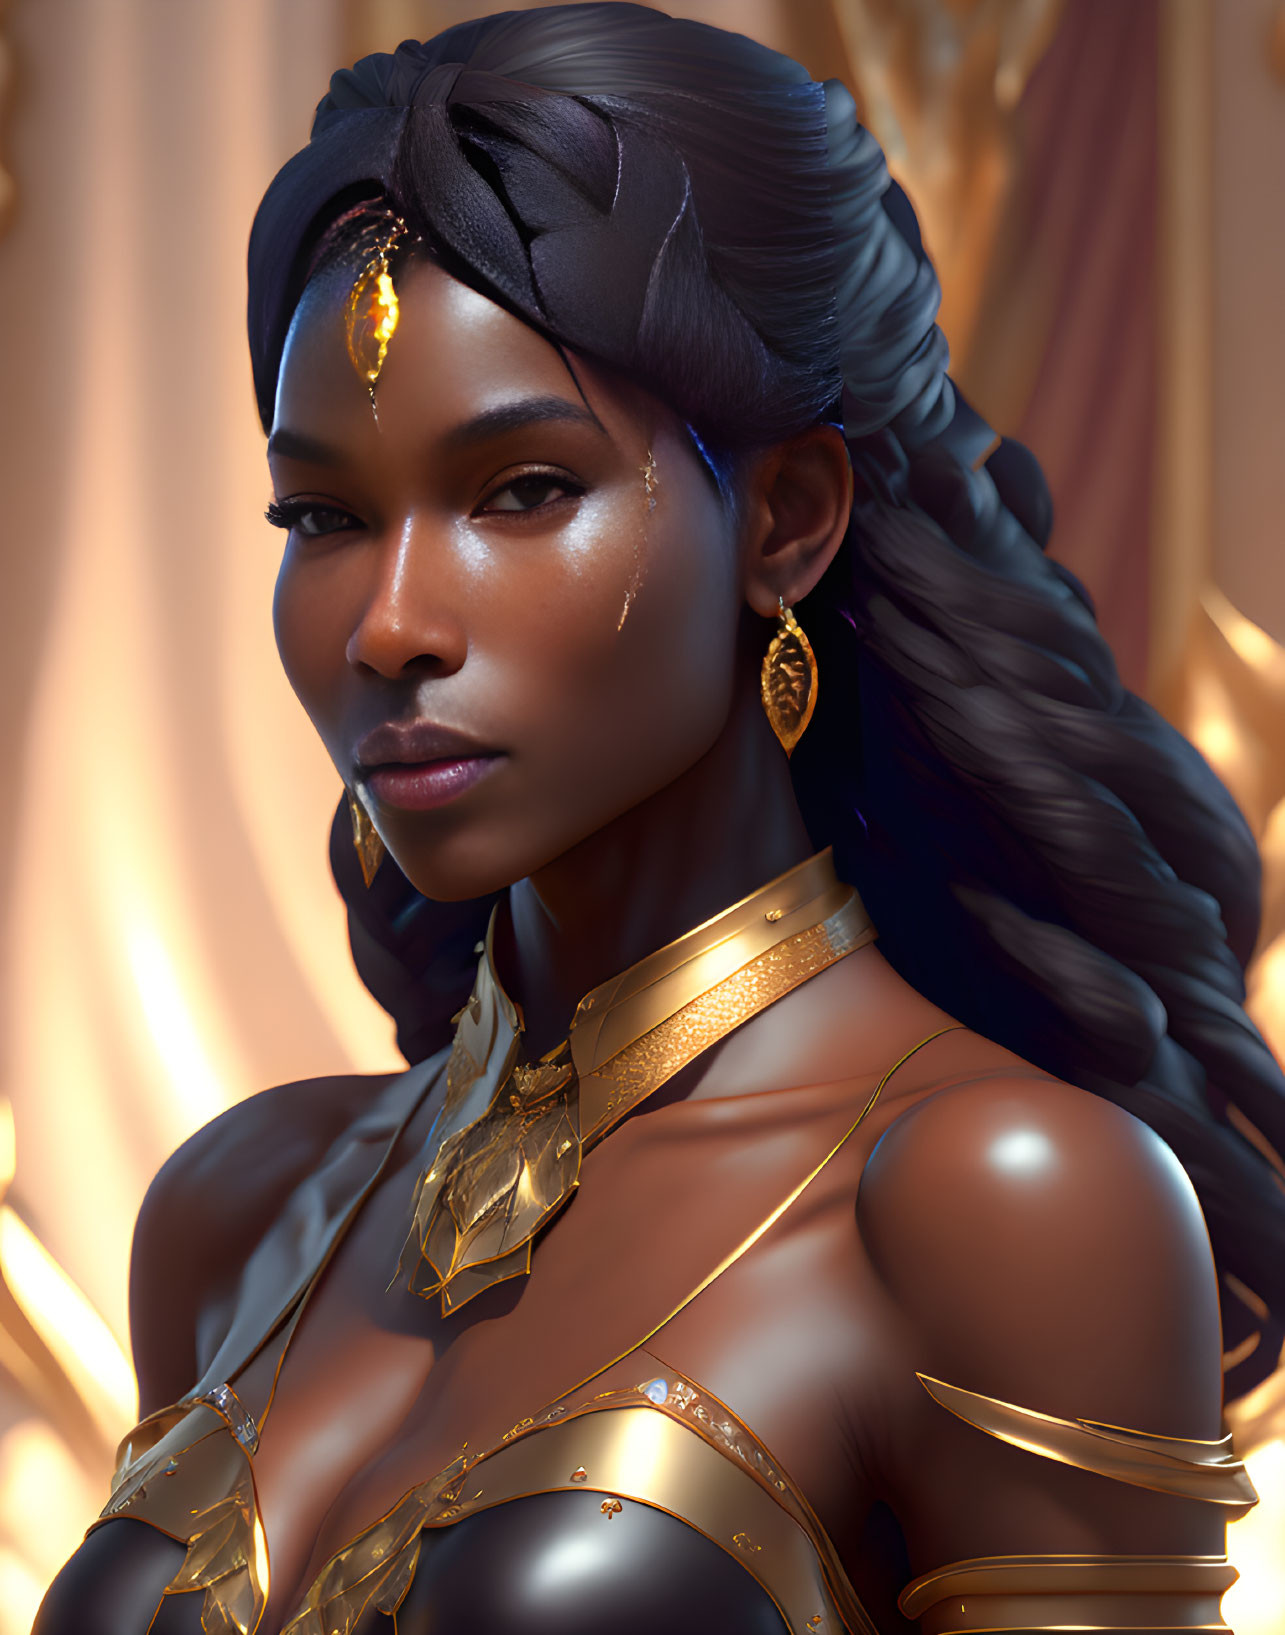 Portrait of a regal woman with braided hairstyle and gold jewelry on golden backdrop